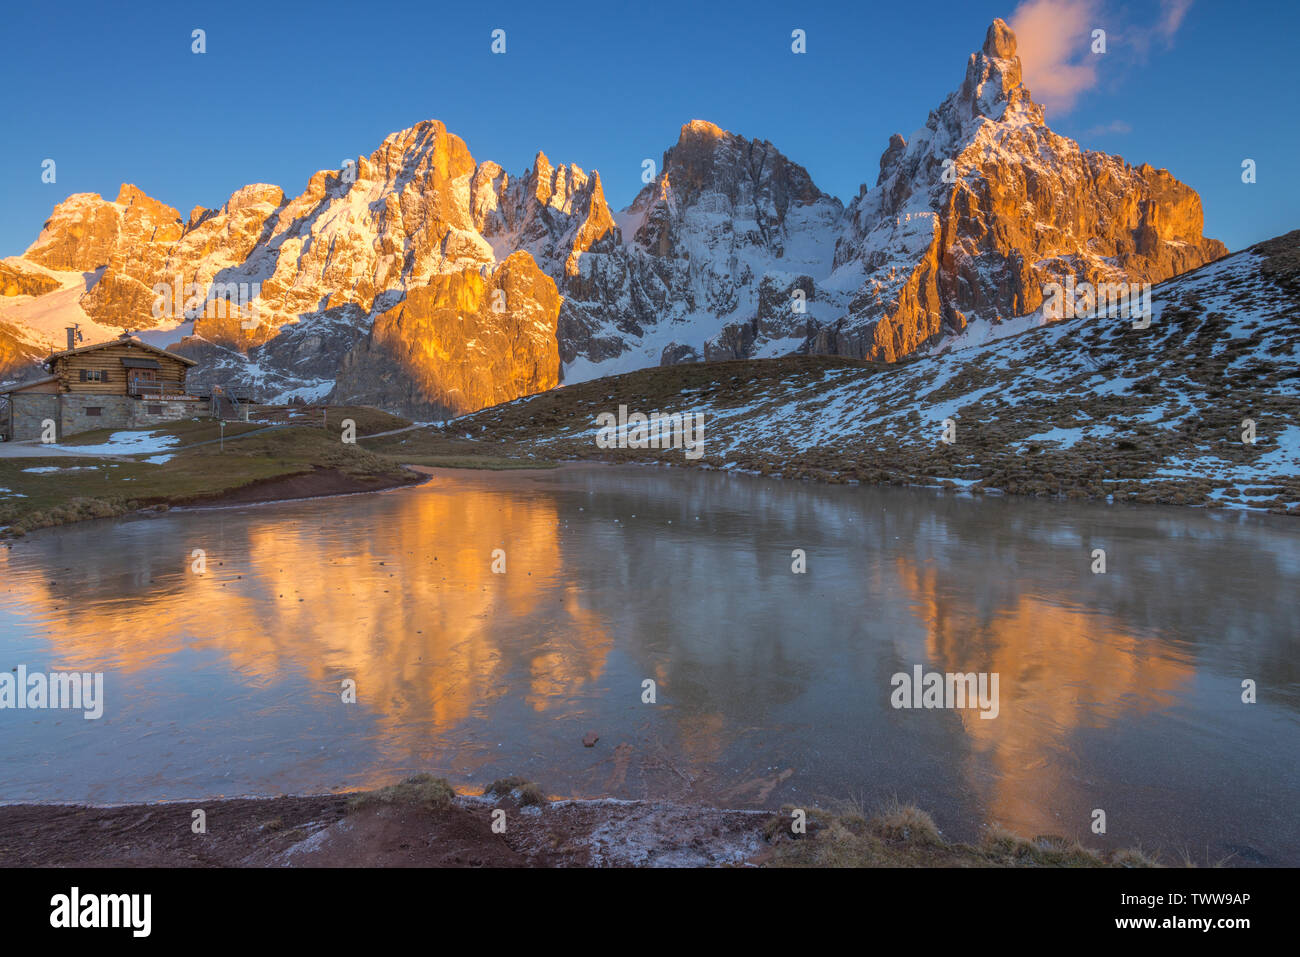 Golden mountains reflected on the water of a frozen lake in the Italian Dolomites. Mountain range during golden hour, water reflections of peaks. Stock Photo